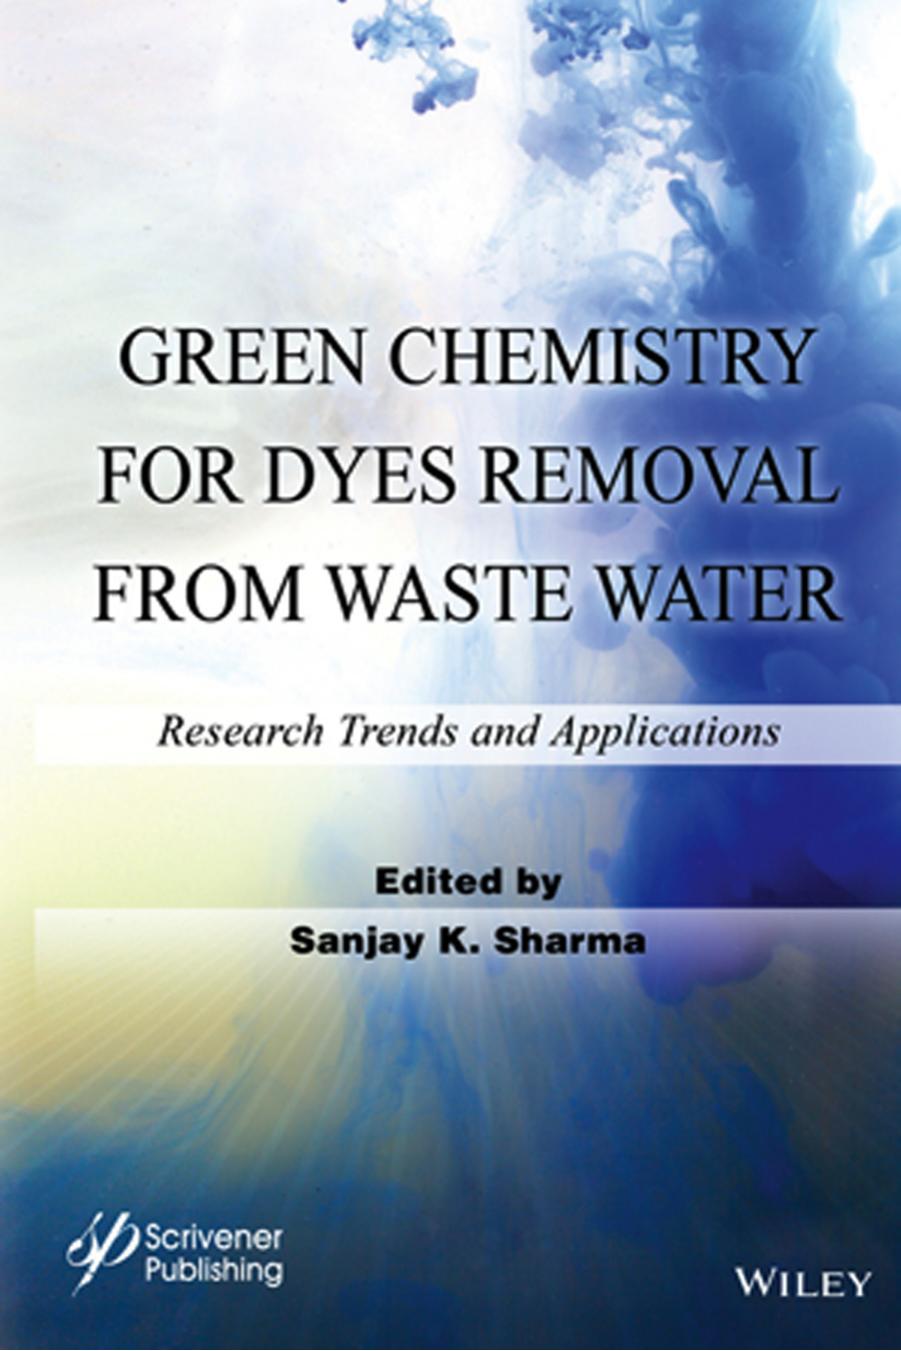 Green Chemistry for Dyes Removal from Waste Water